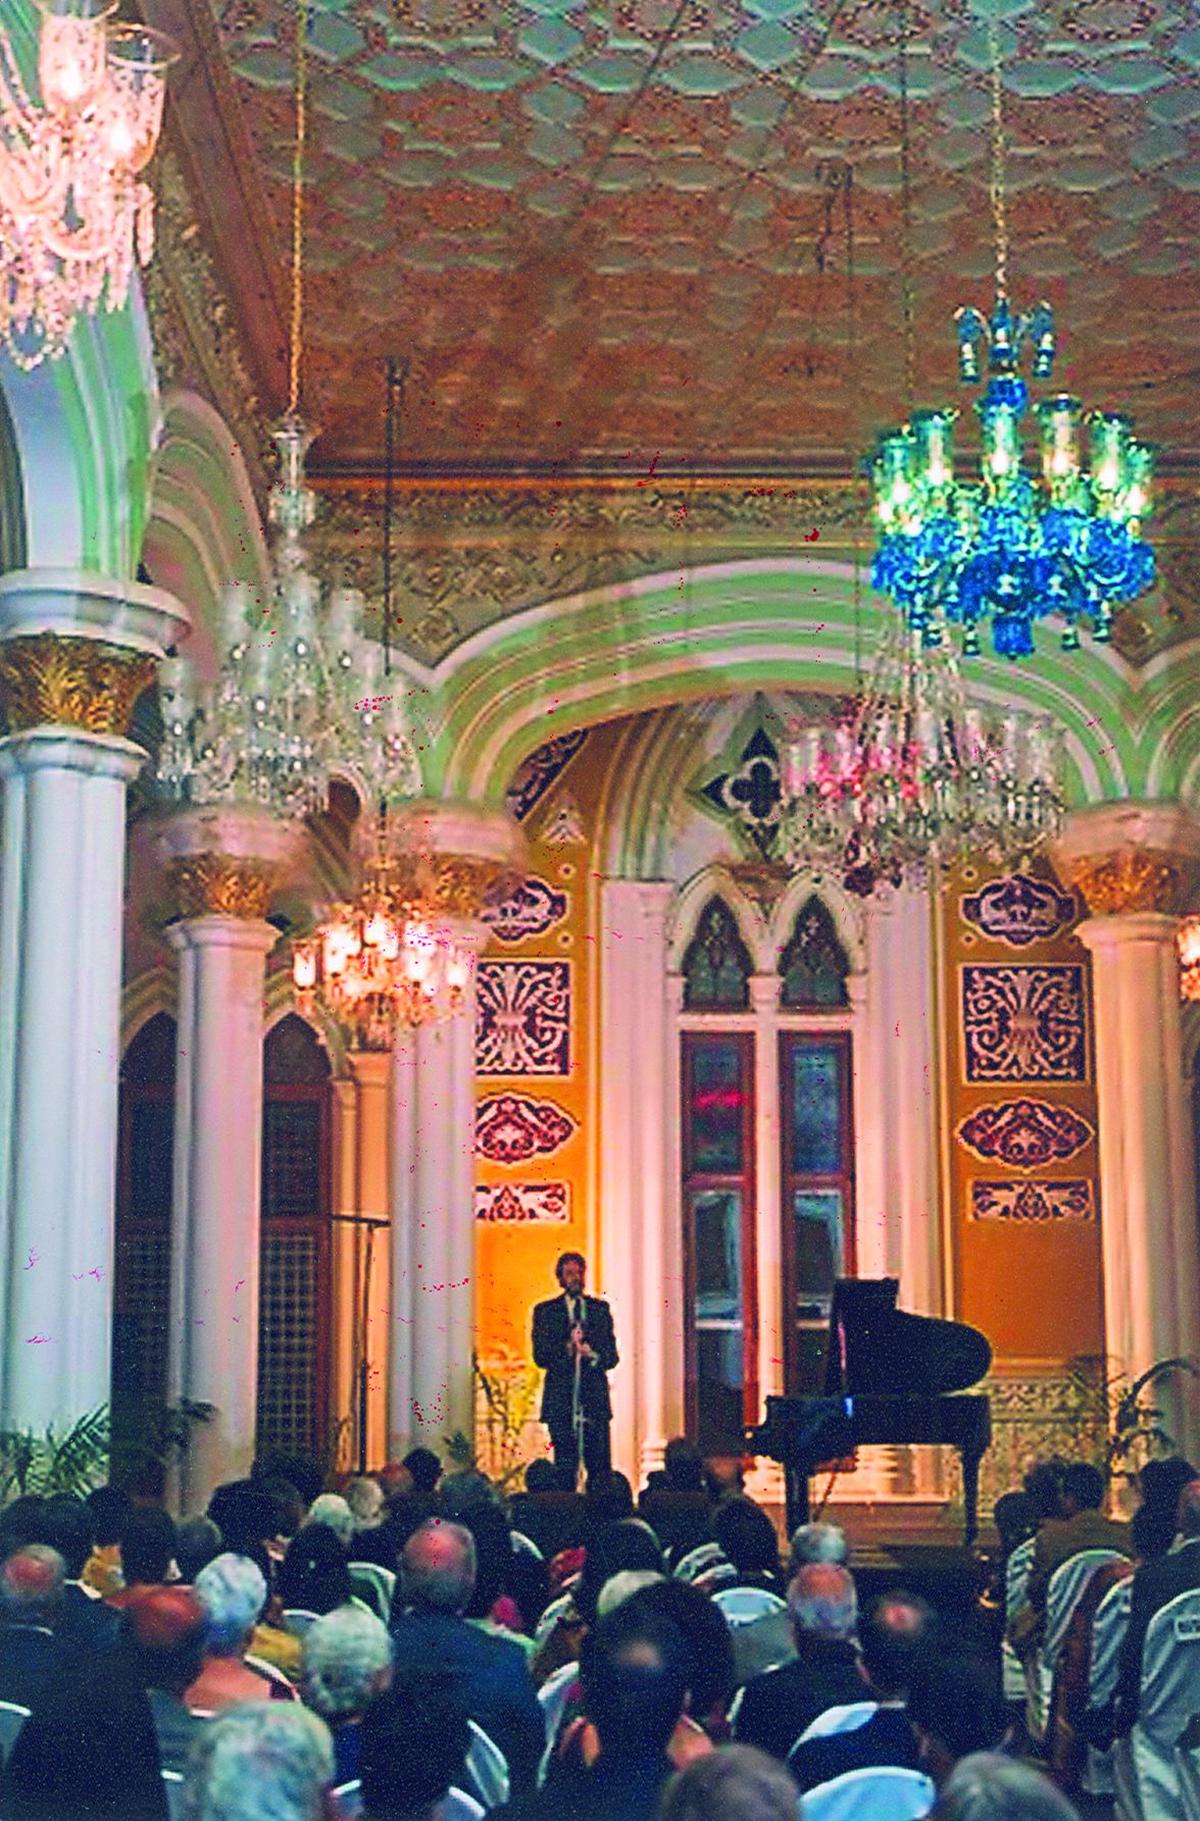 Canadian pianist Paul Stewart performing for IMAS 35th anniversary at the Durbar Hall in Bangalore palace. He played Nicolai Medtner’s compositions as a tribute to the late Jayachamarajendra Wadiyar of Mysore in 2010. 